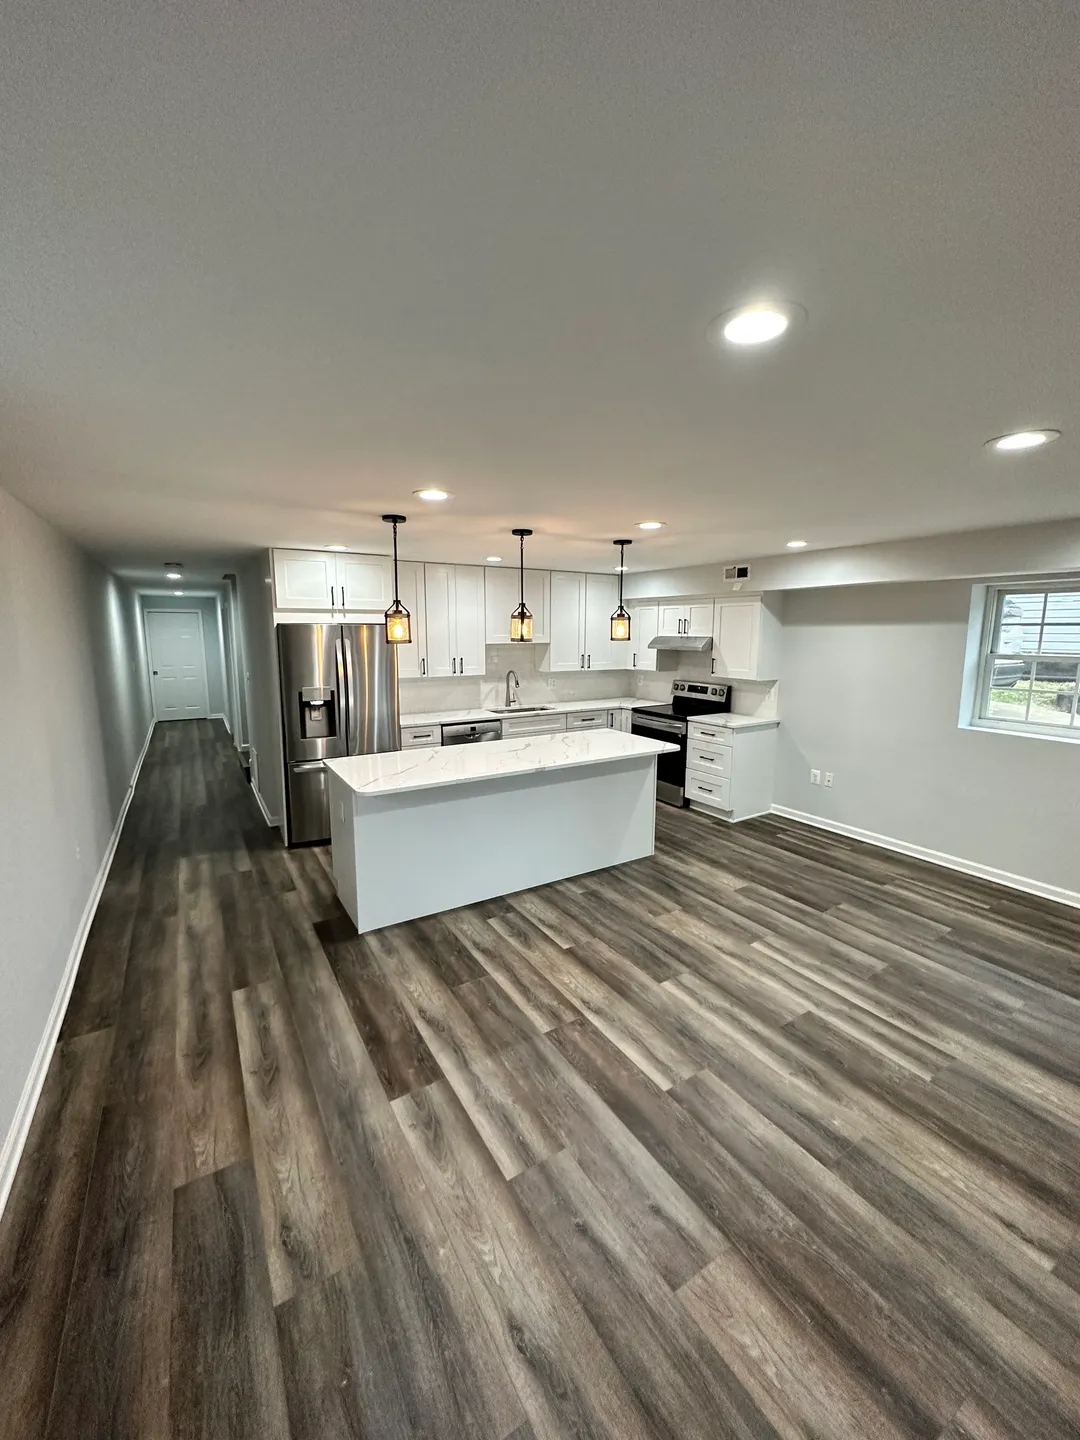 A kitchen with wood floors and white walls.